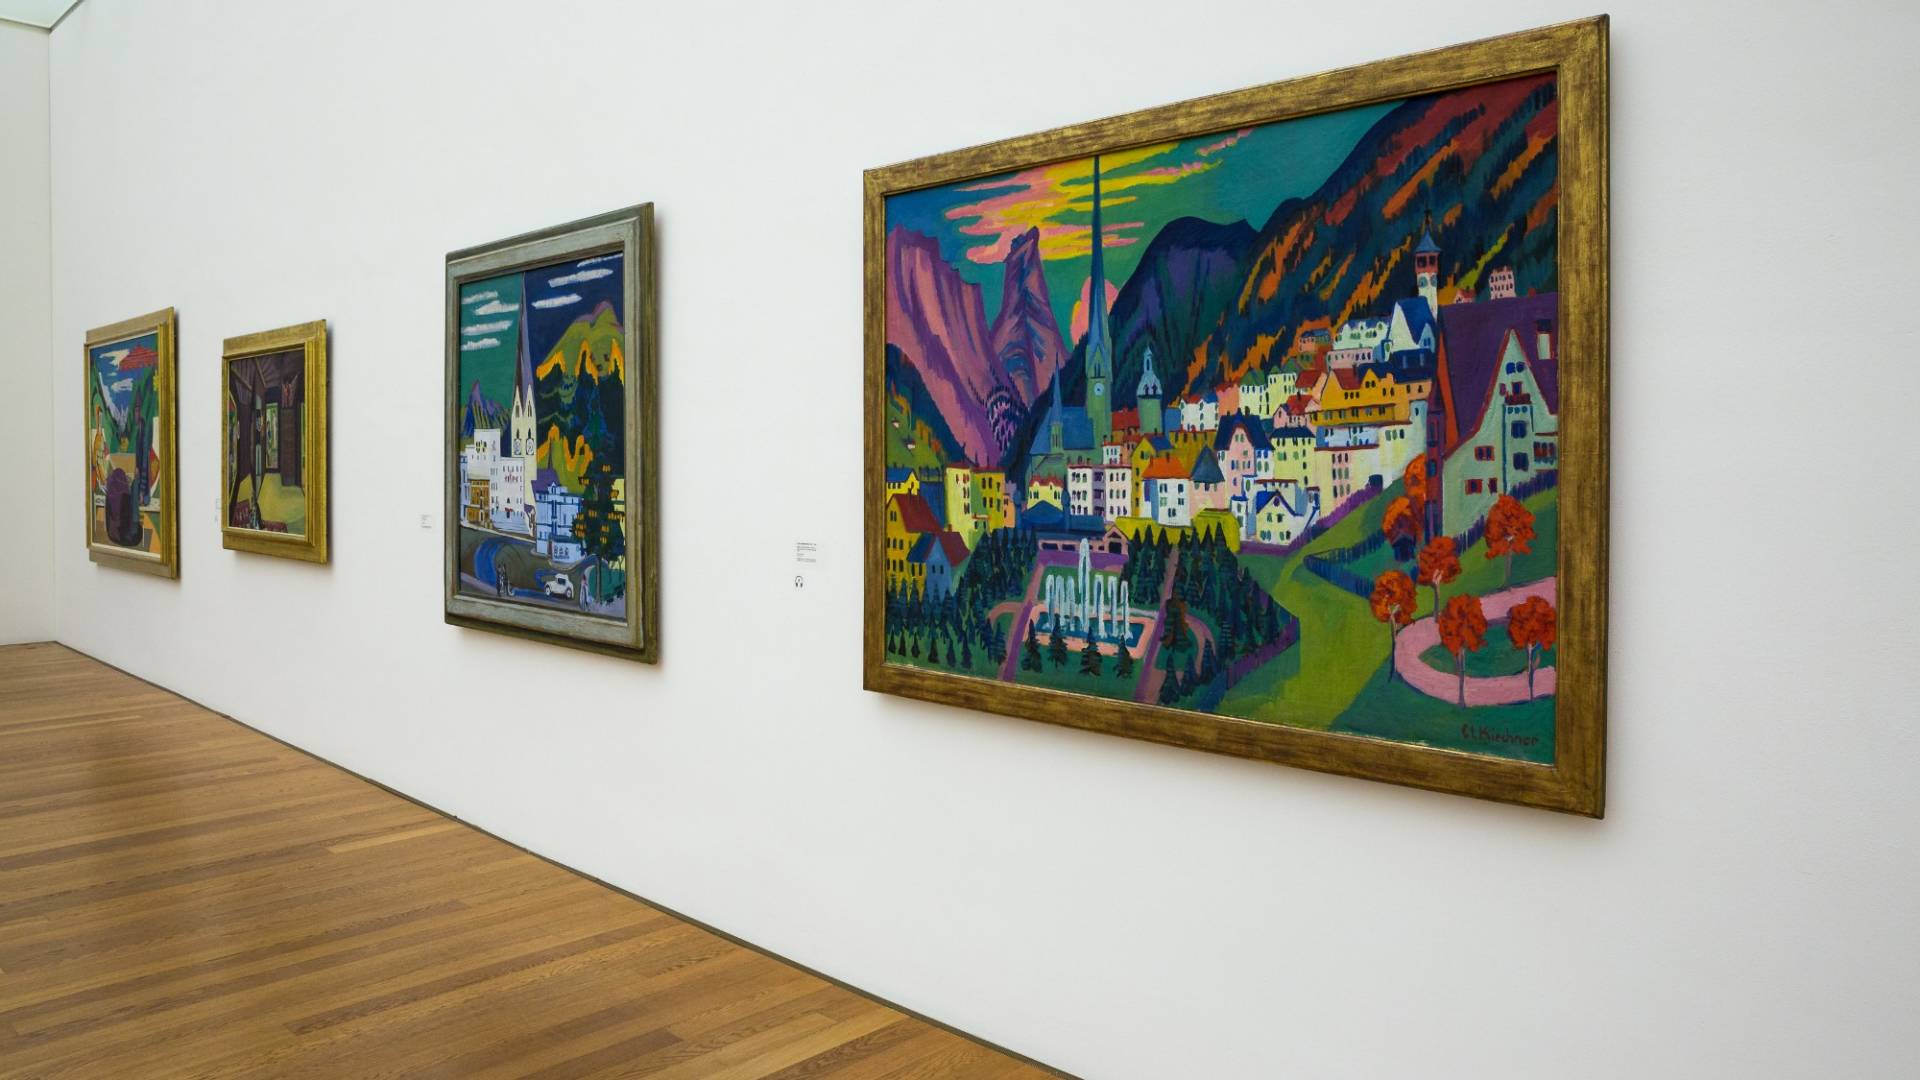 Exhibition at the Kirchner Museum Davos: from 2019 it will be possible to reference the development of many works digitally too. 